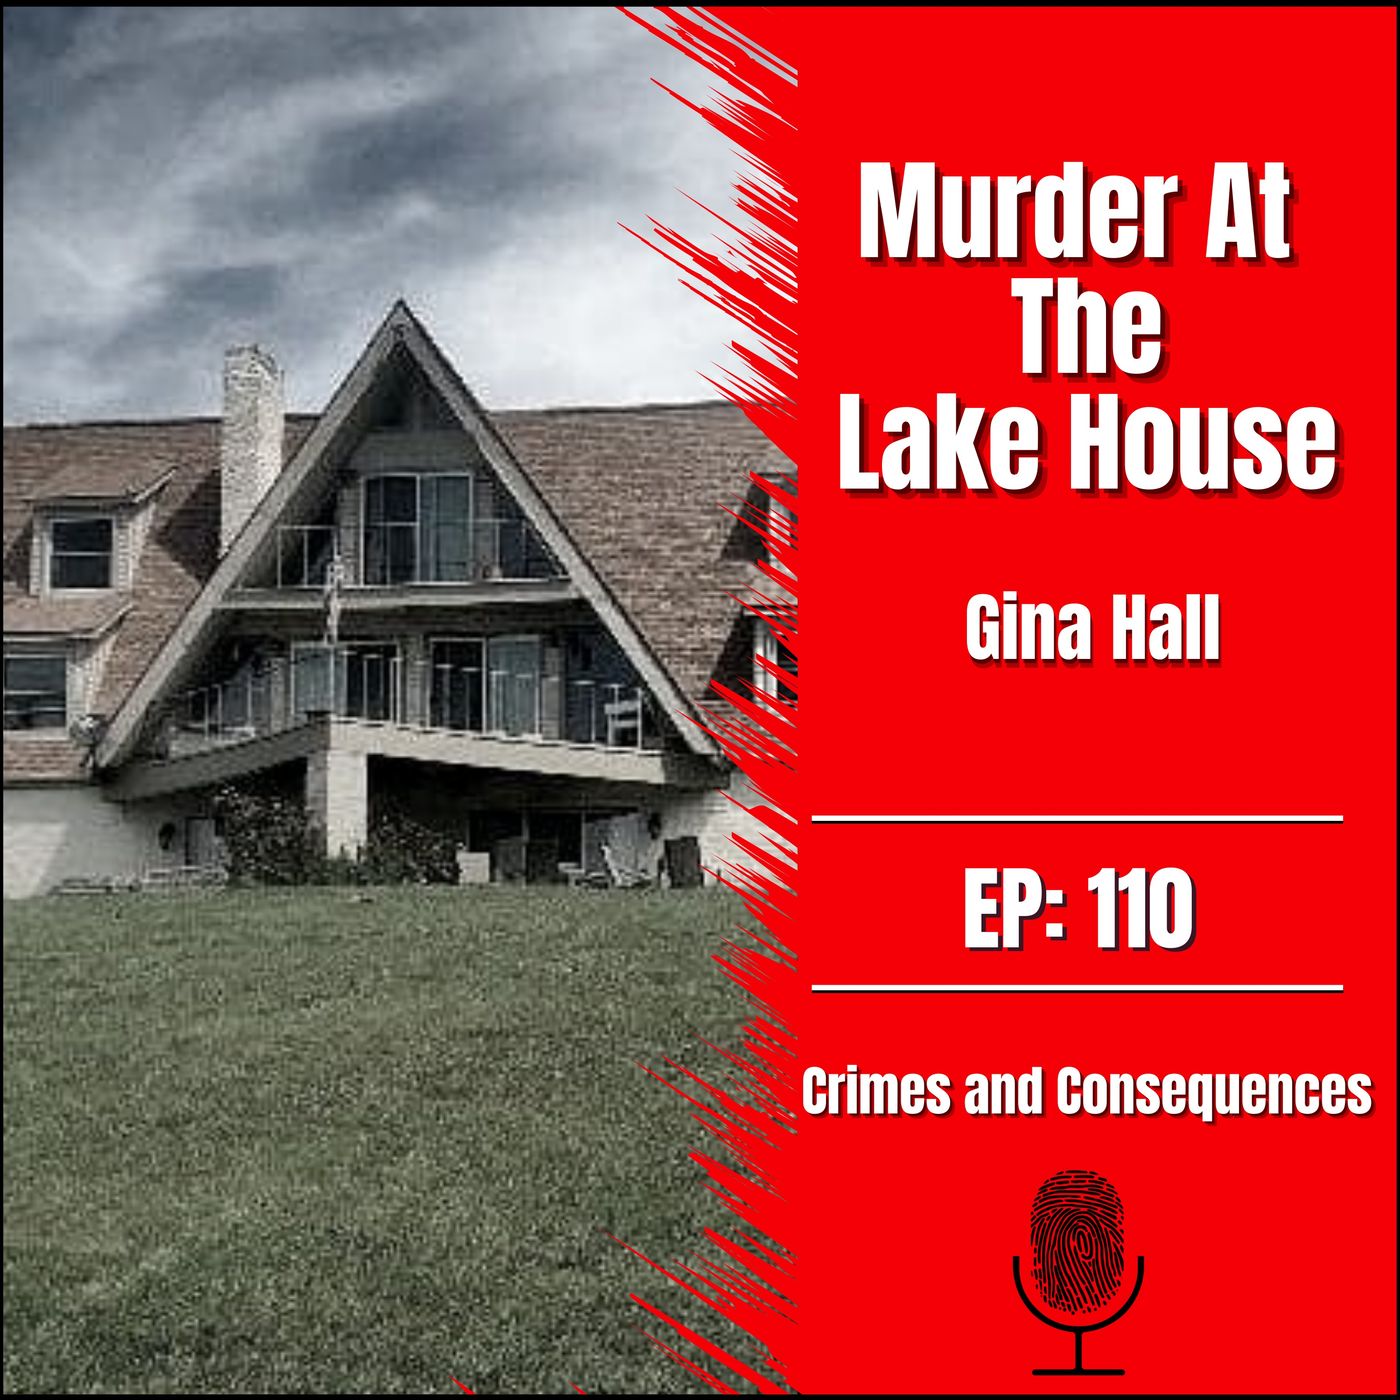 EP110: Murder At The Lake House